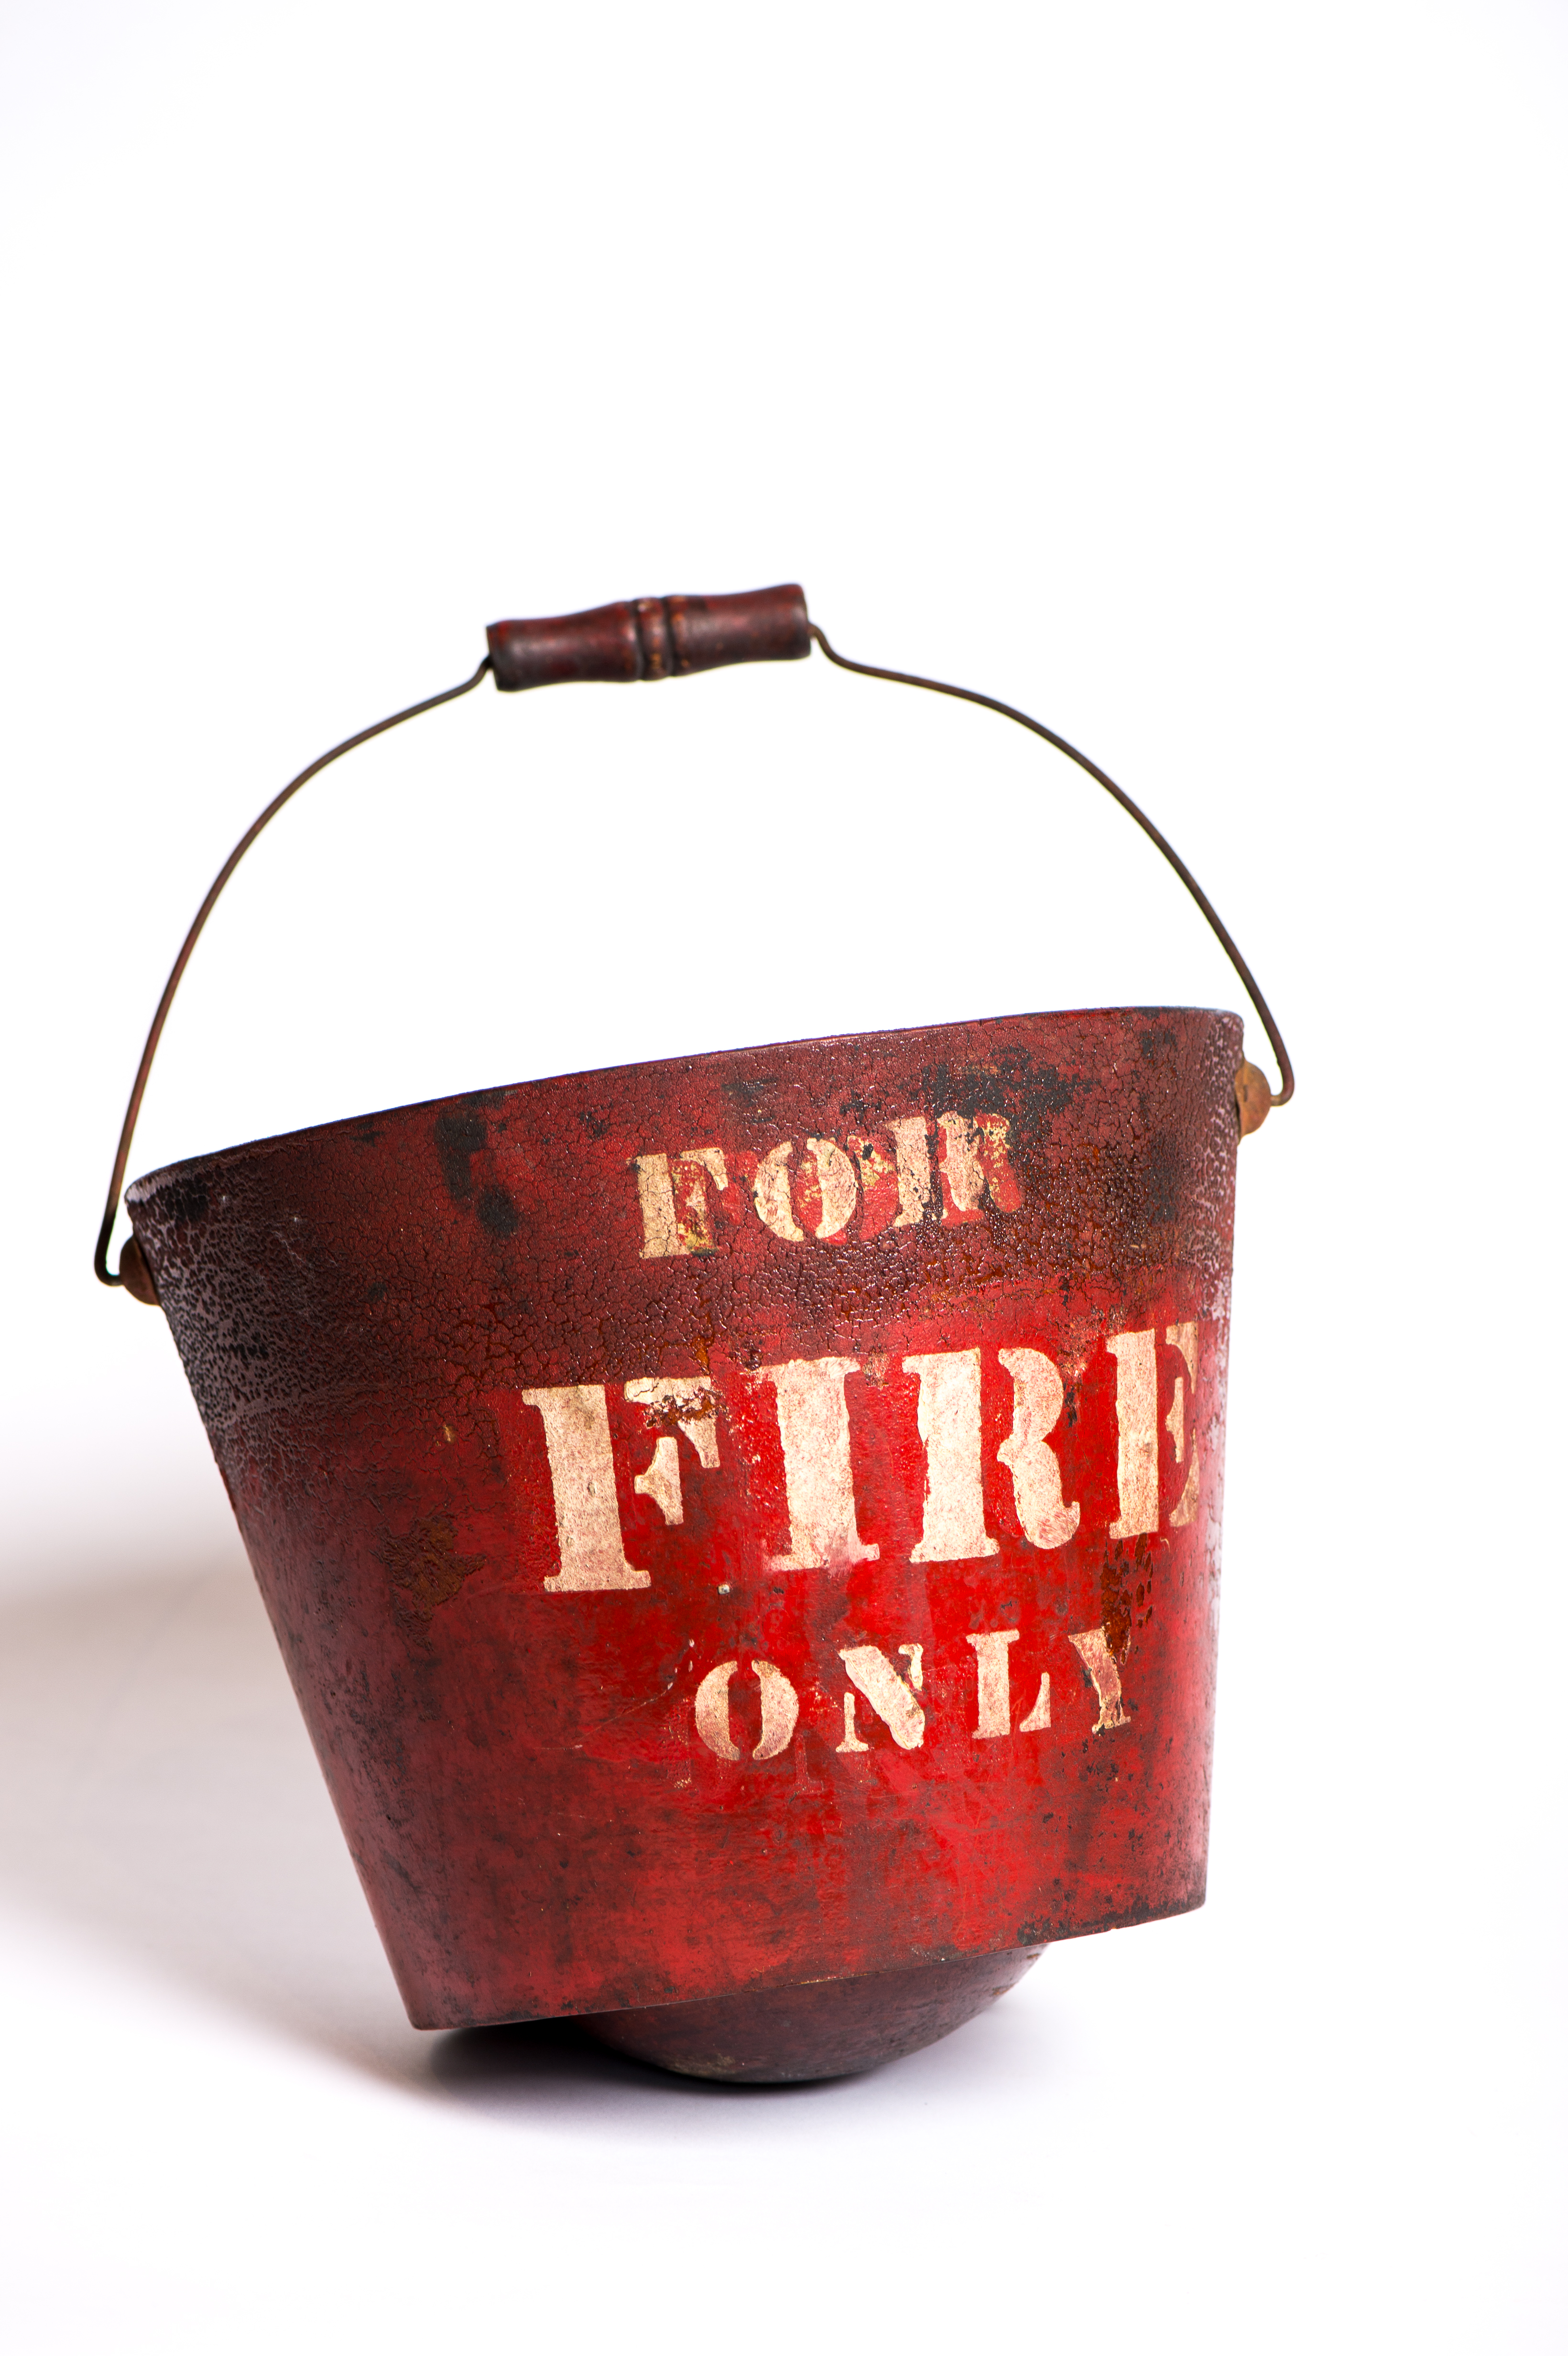 Photograph of a red round-bottomed fire bucket bearing the English words ‘For fire only’ in block letters.